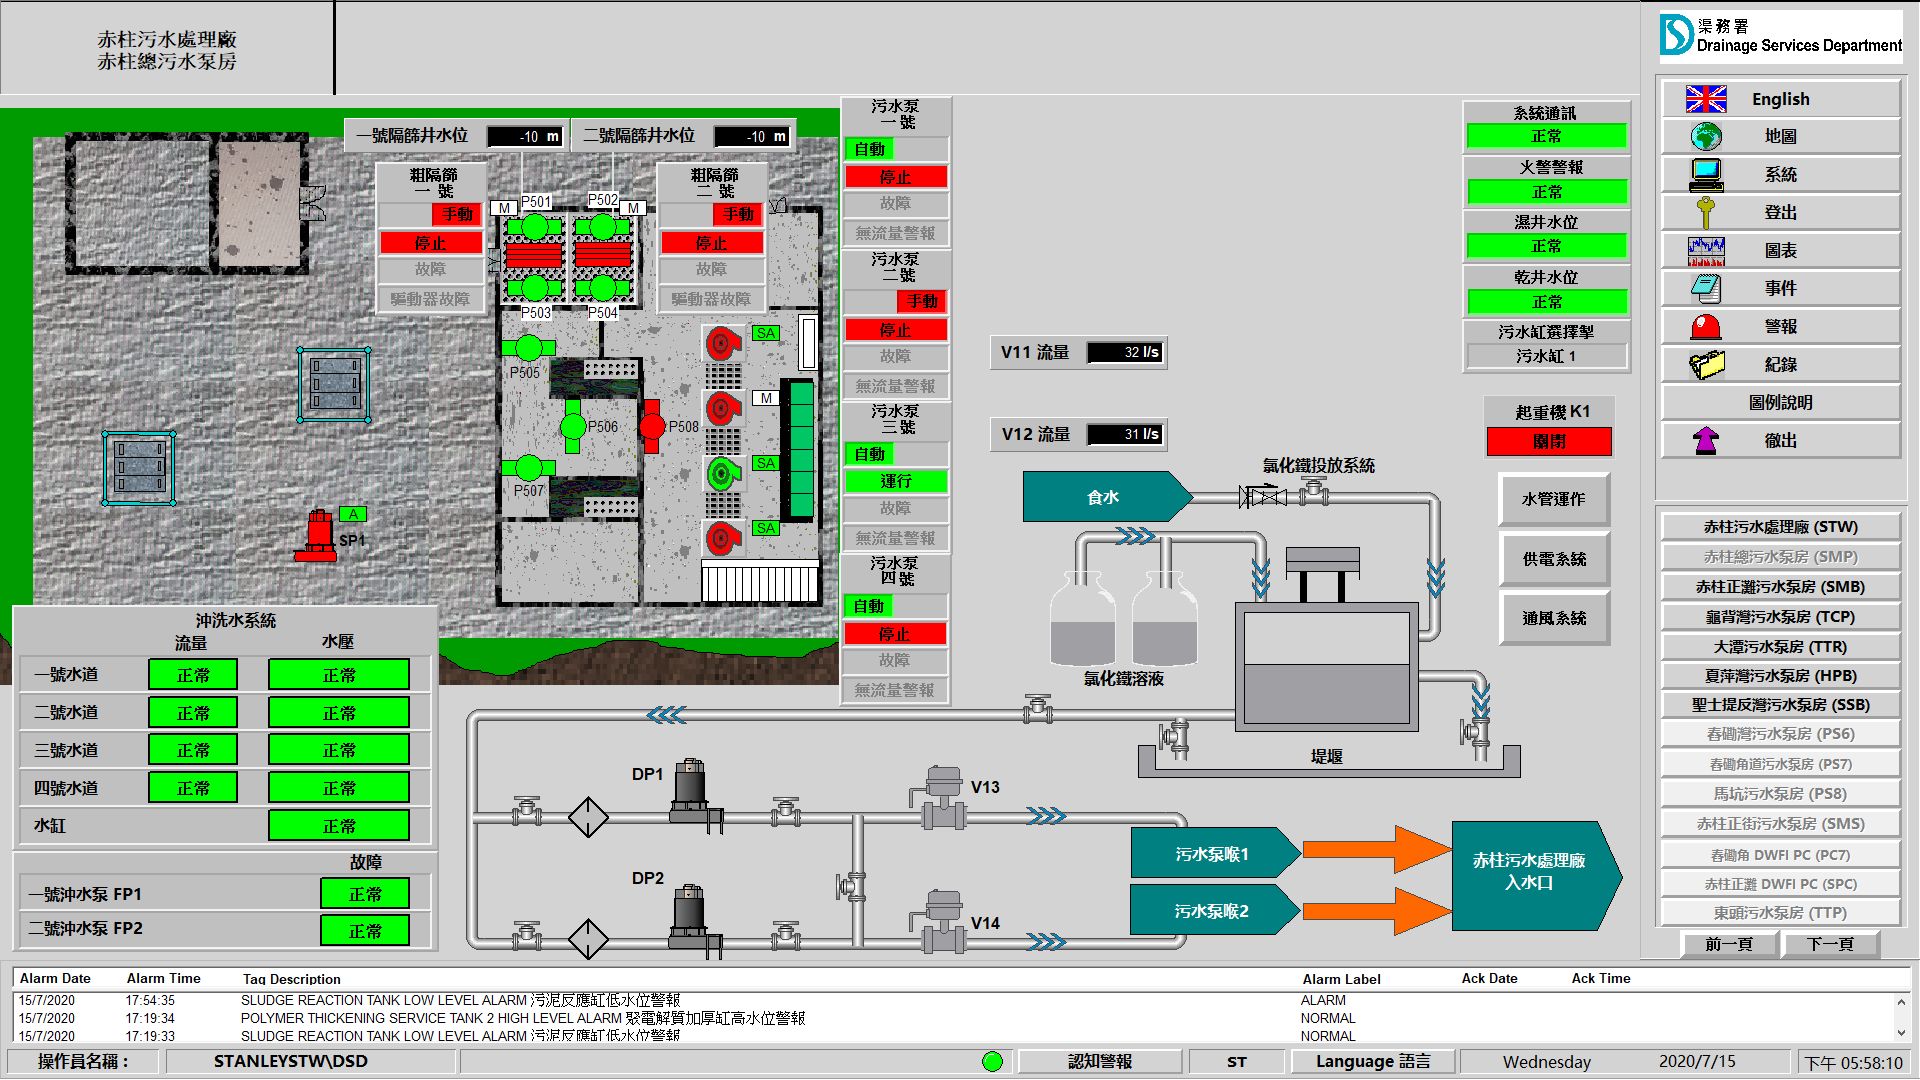 Stanley Main Sewage Pumping Station Overview Page screenshot from FactoryTalk View After Works in DSD Stanley STW (Typical)